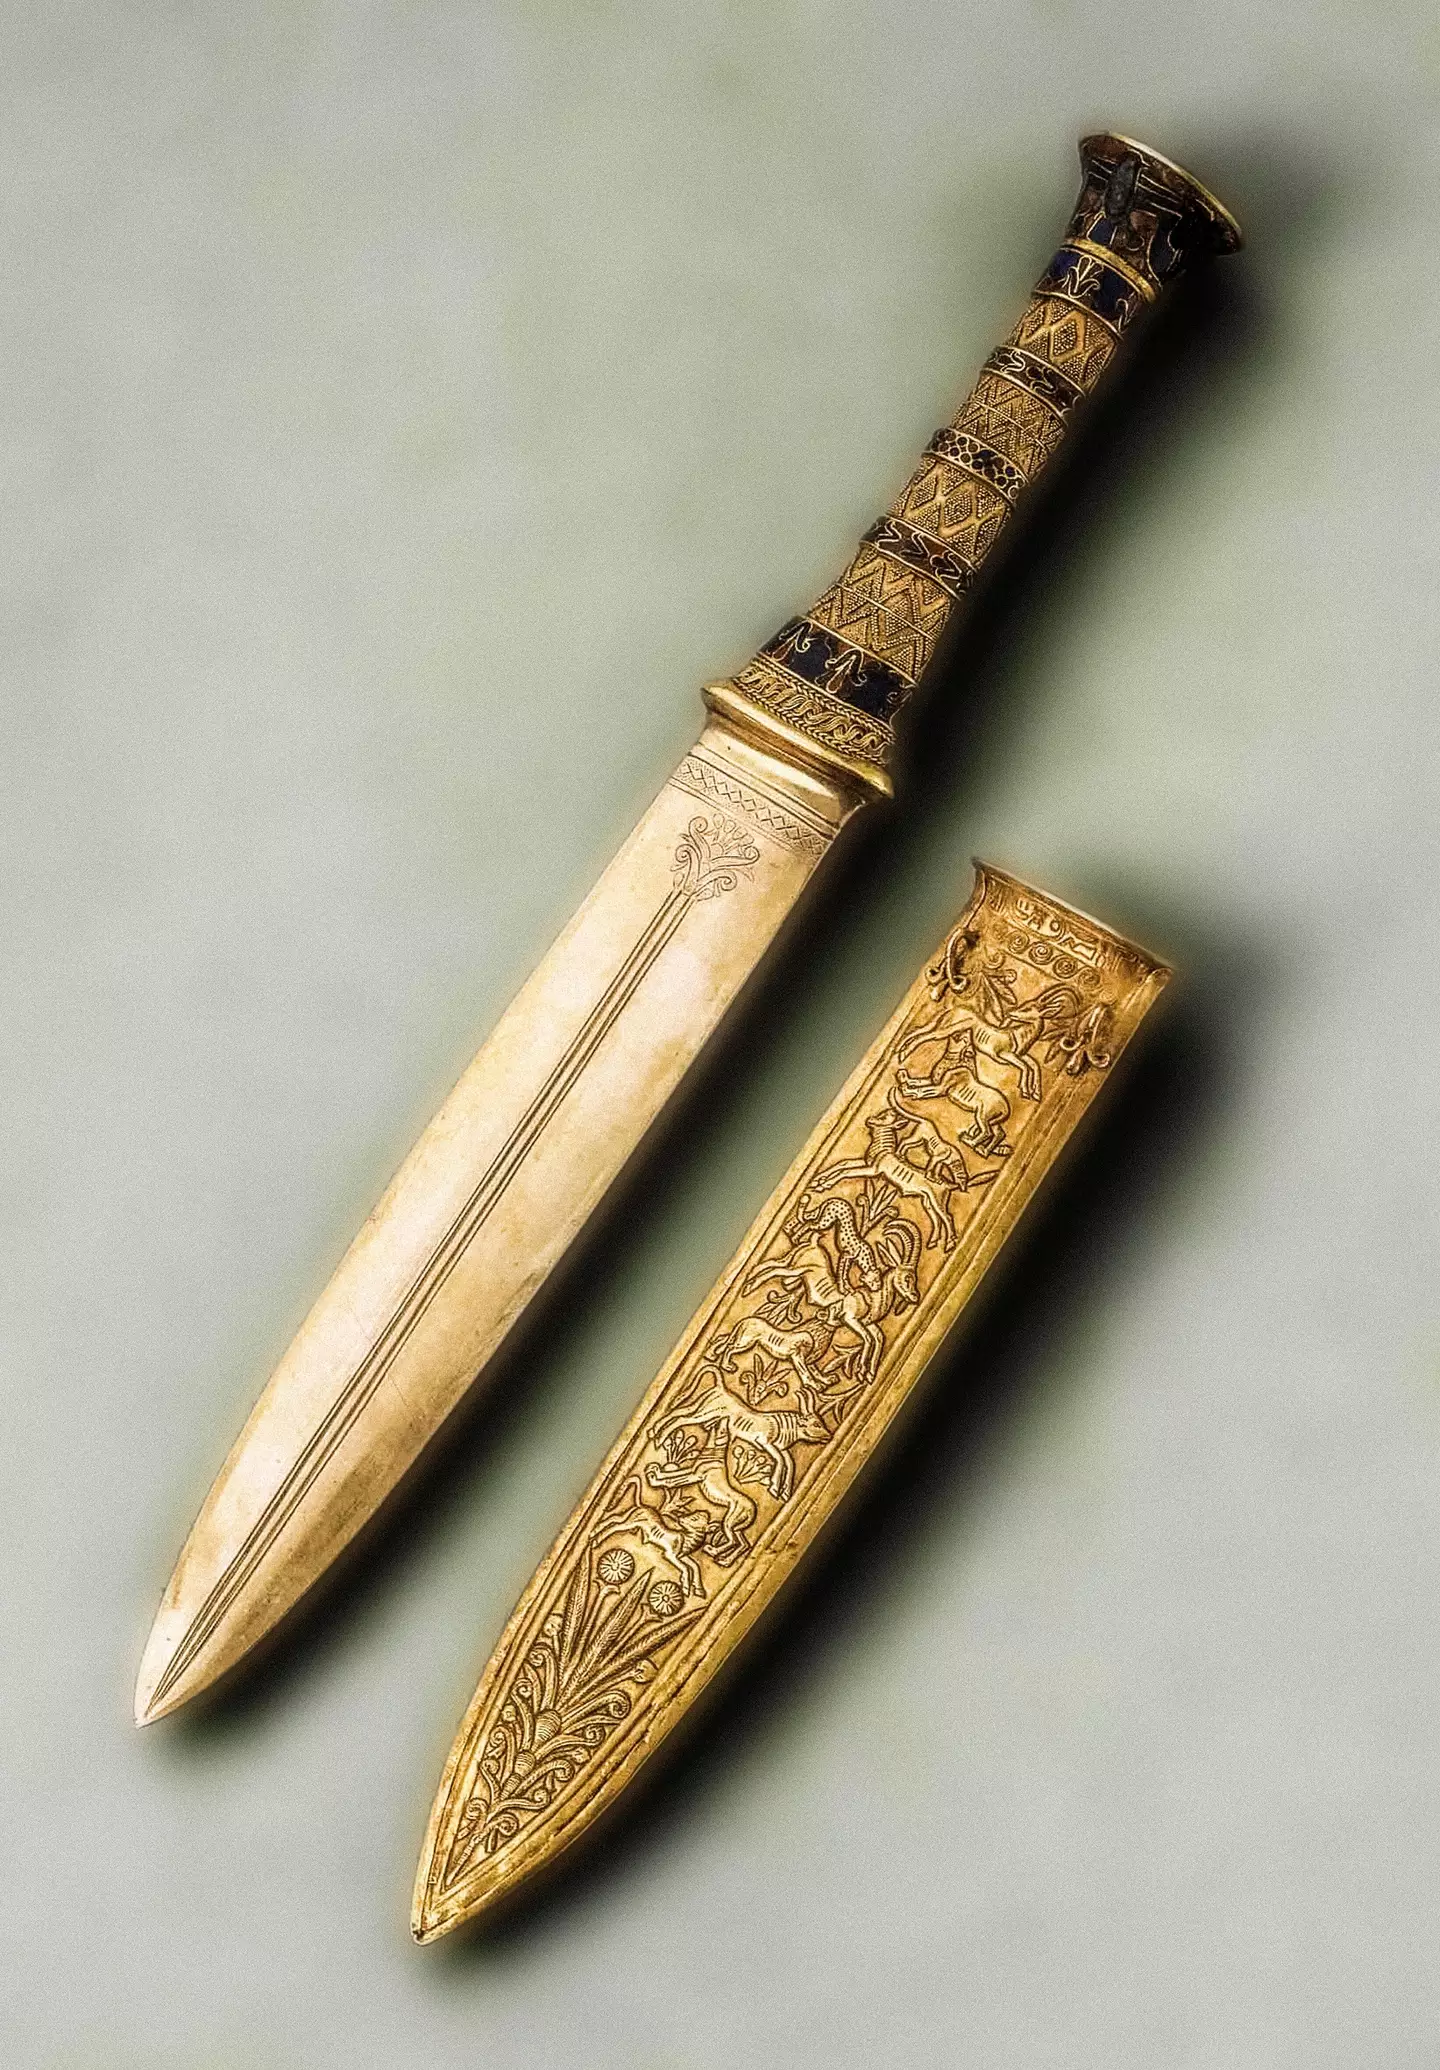 Tutankhamun's dagger, which scientists believe came from outer space.